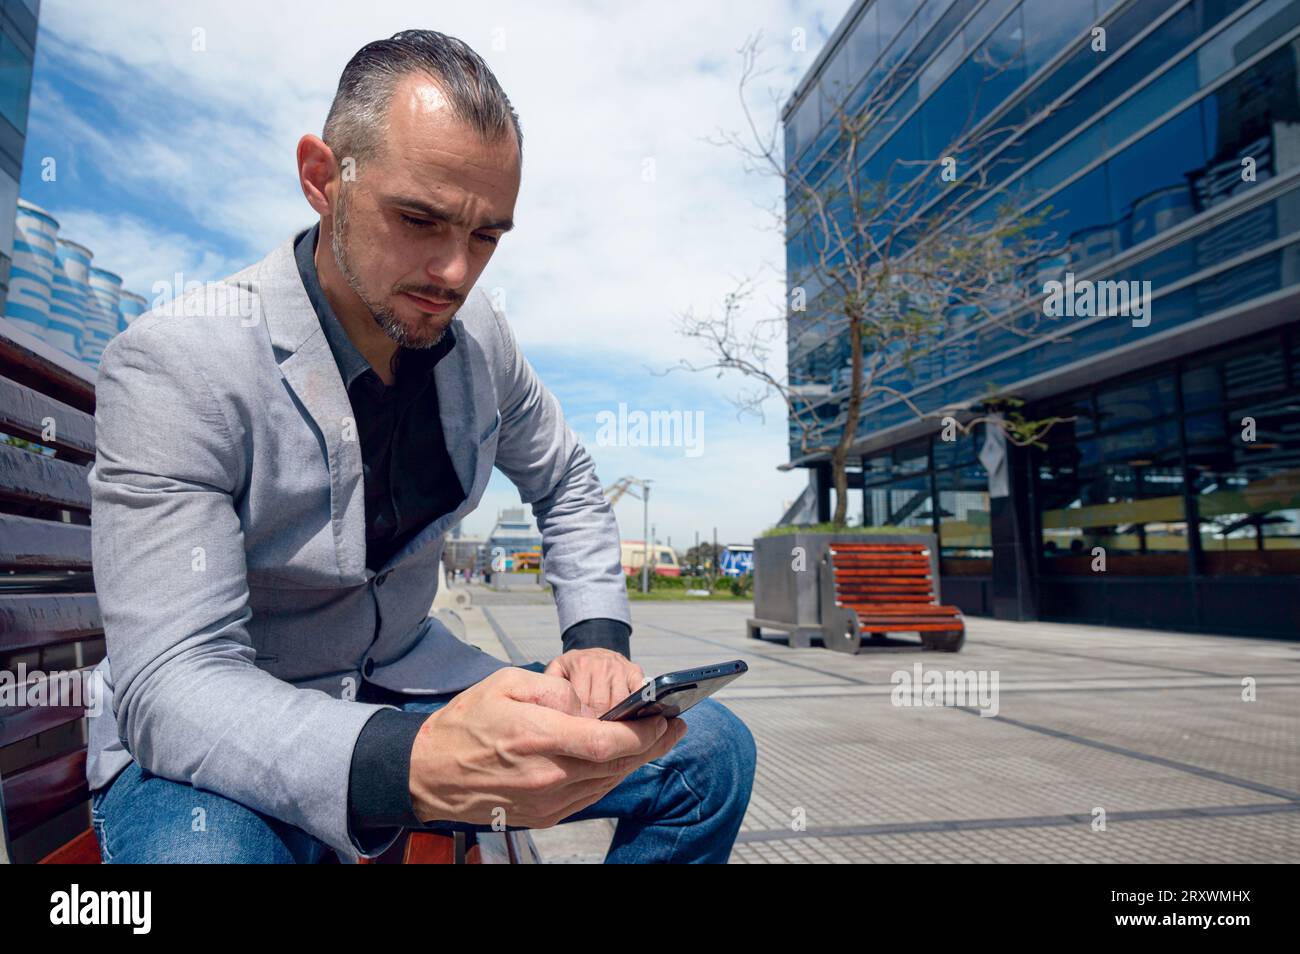 French Caucasian adult businessman with beard wearing stylish clothes, sitting outdoors with commercial buildings around, using phone sending messages Stock Photo